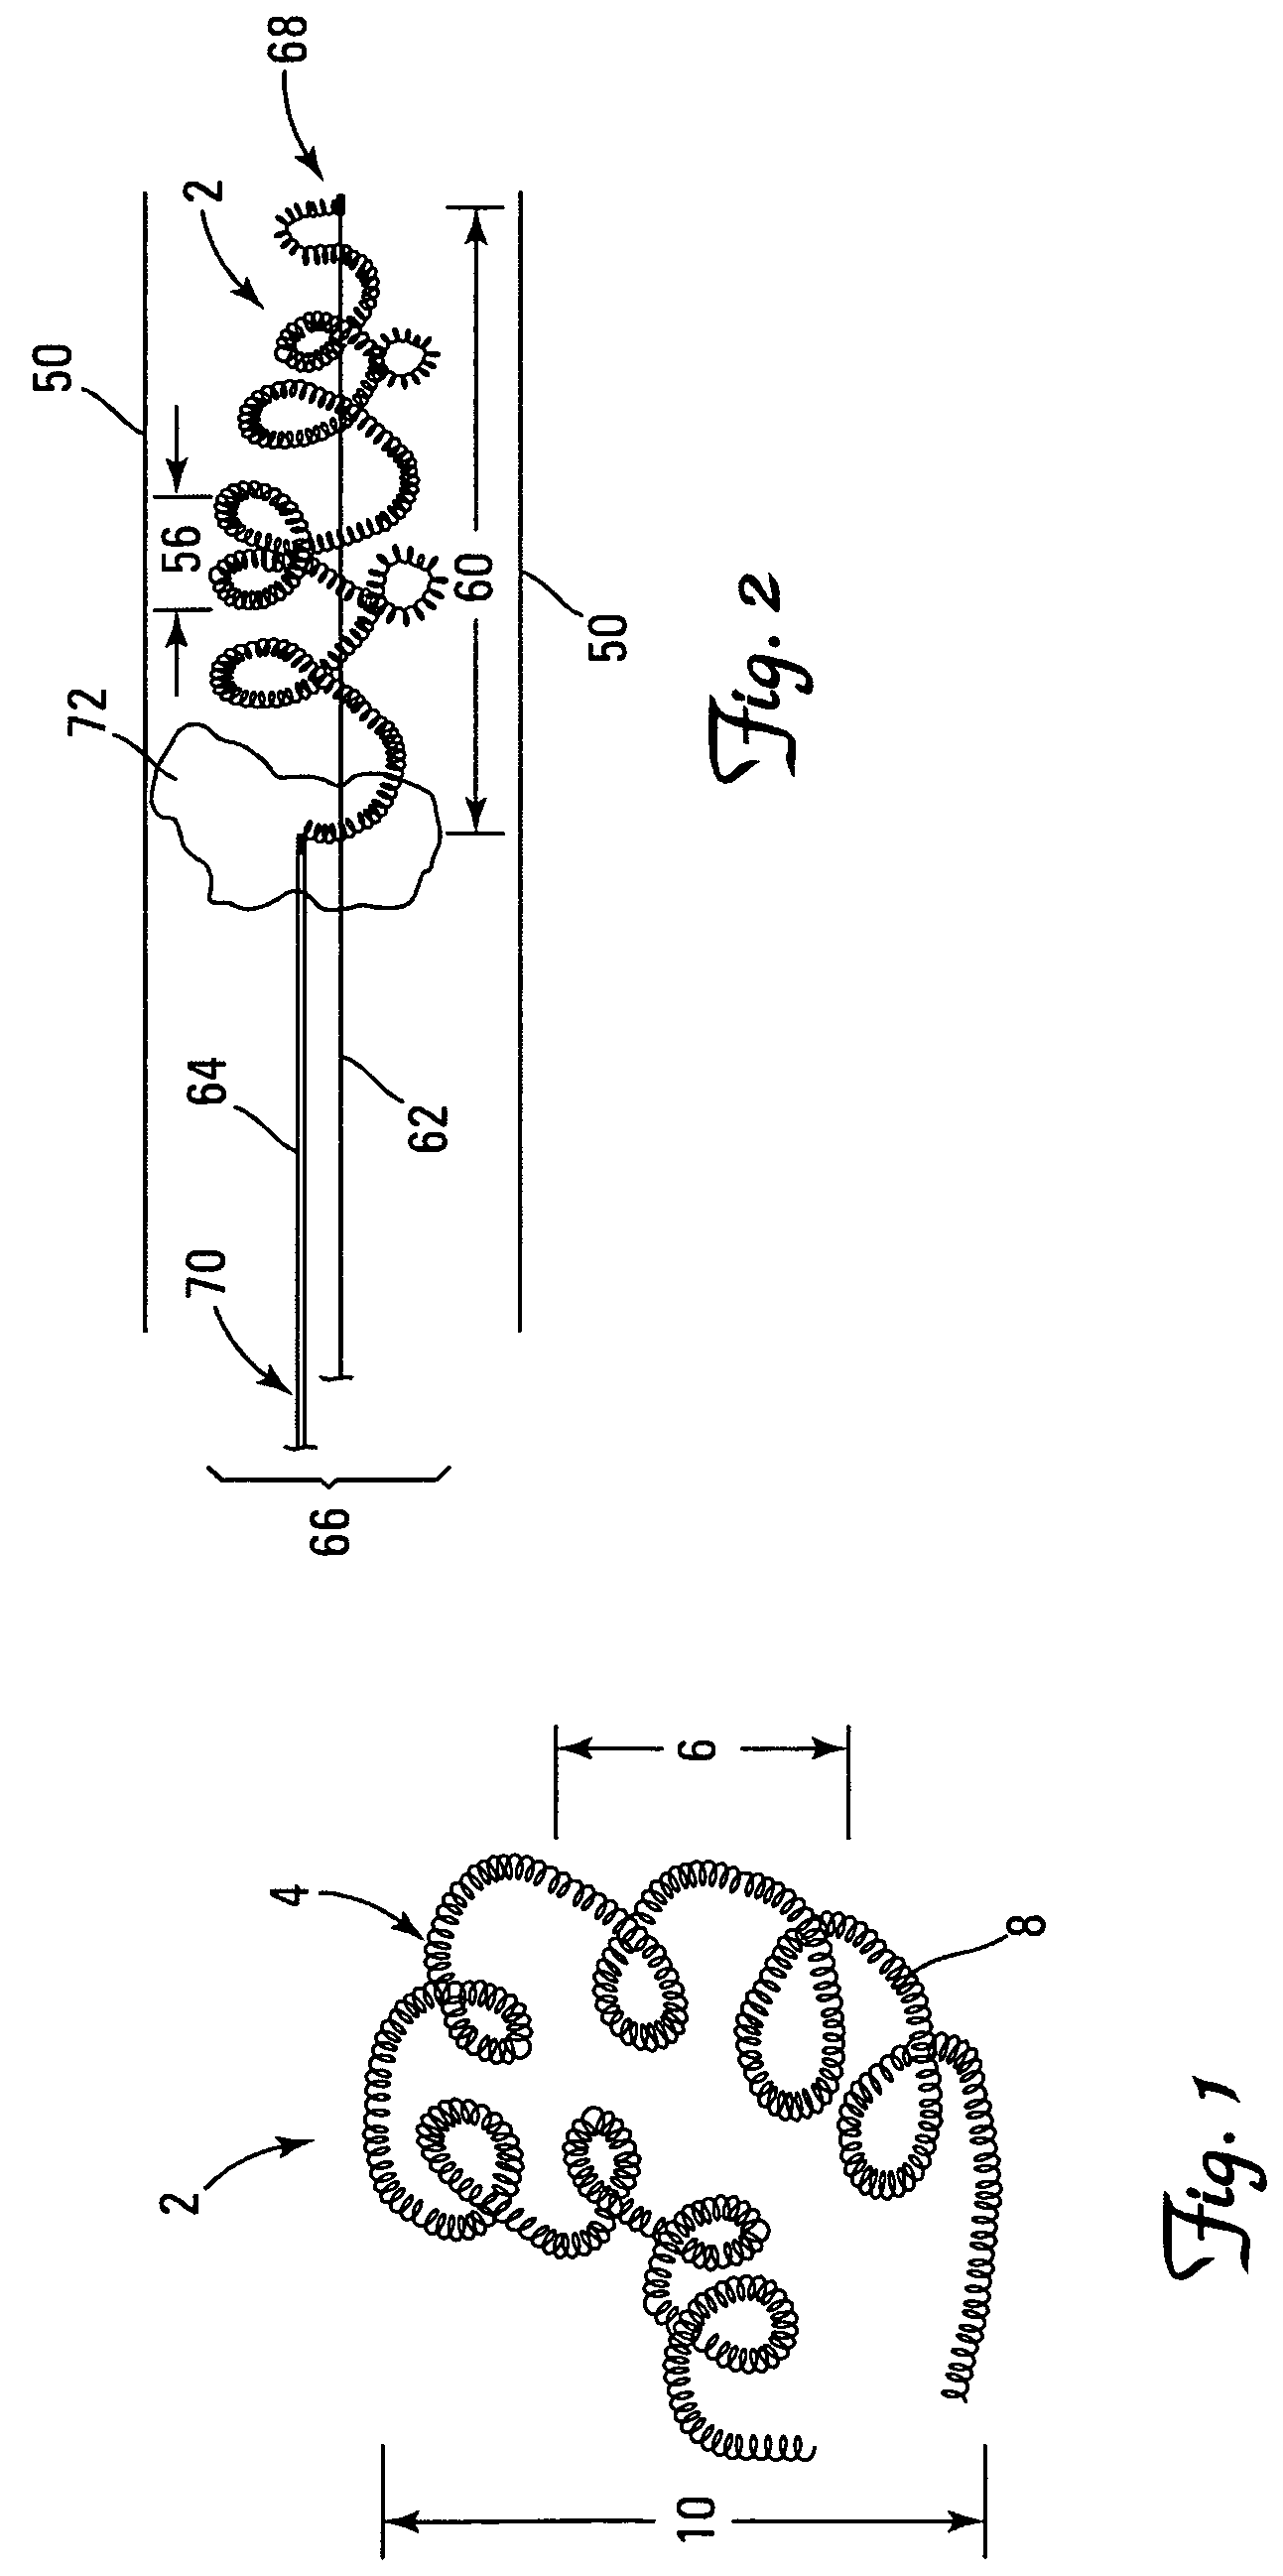 Thrombus removal system and process